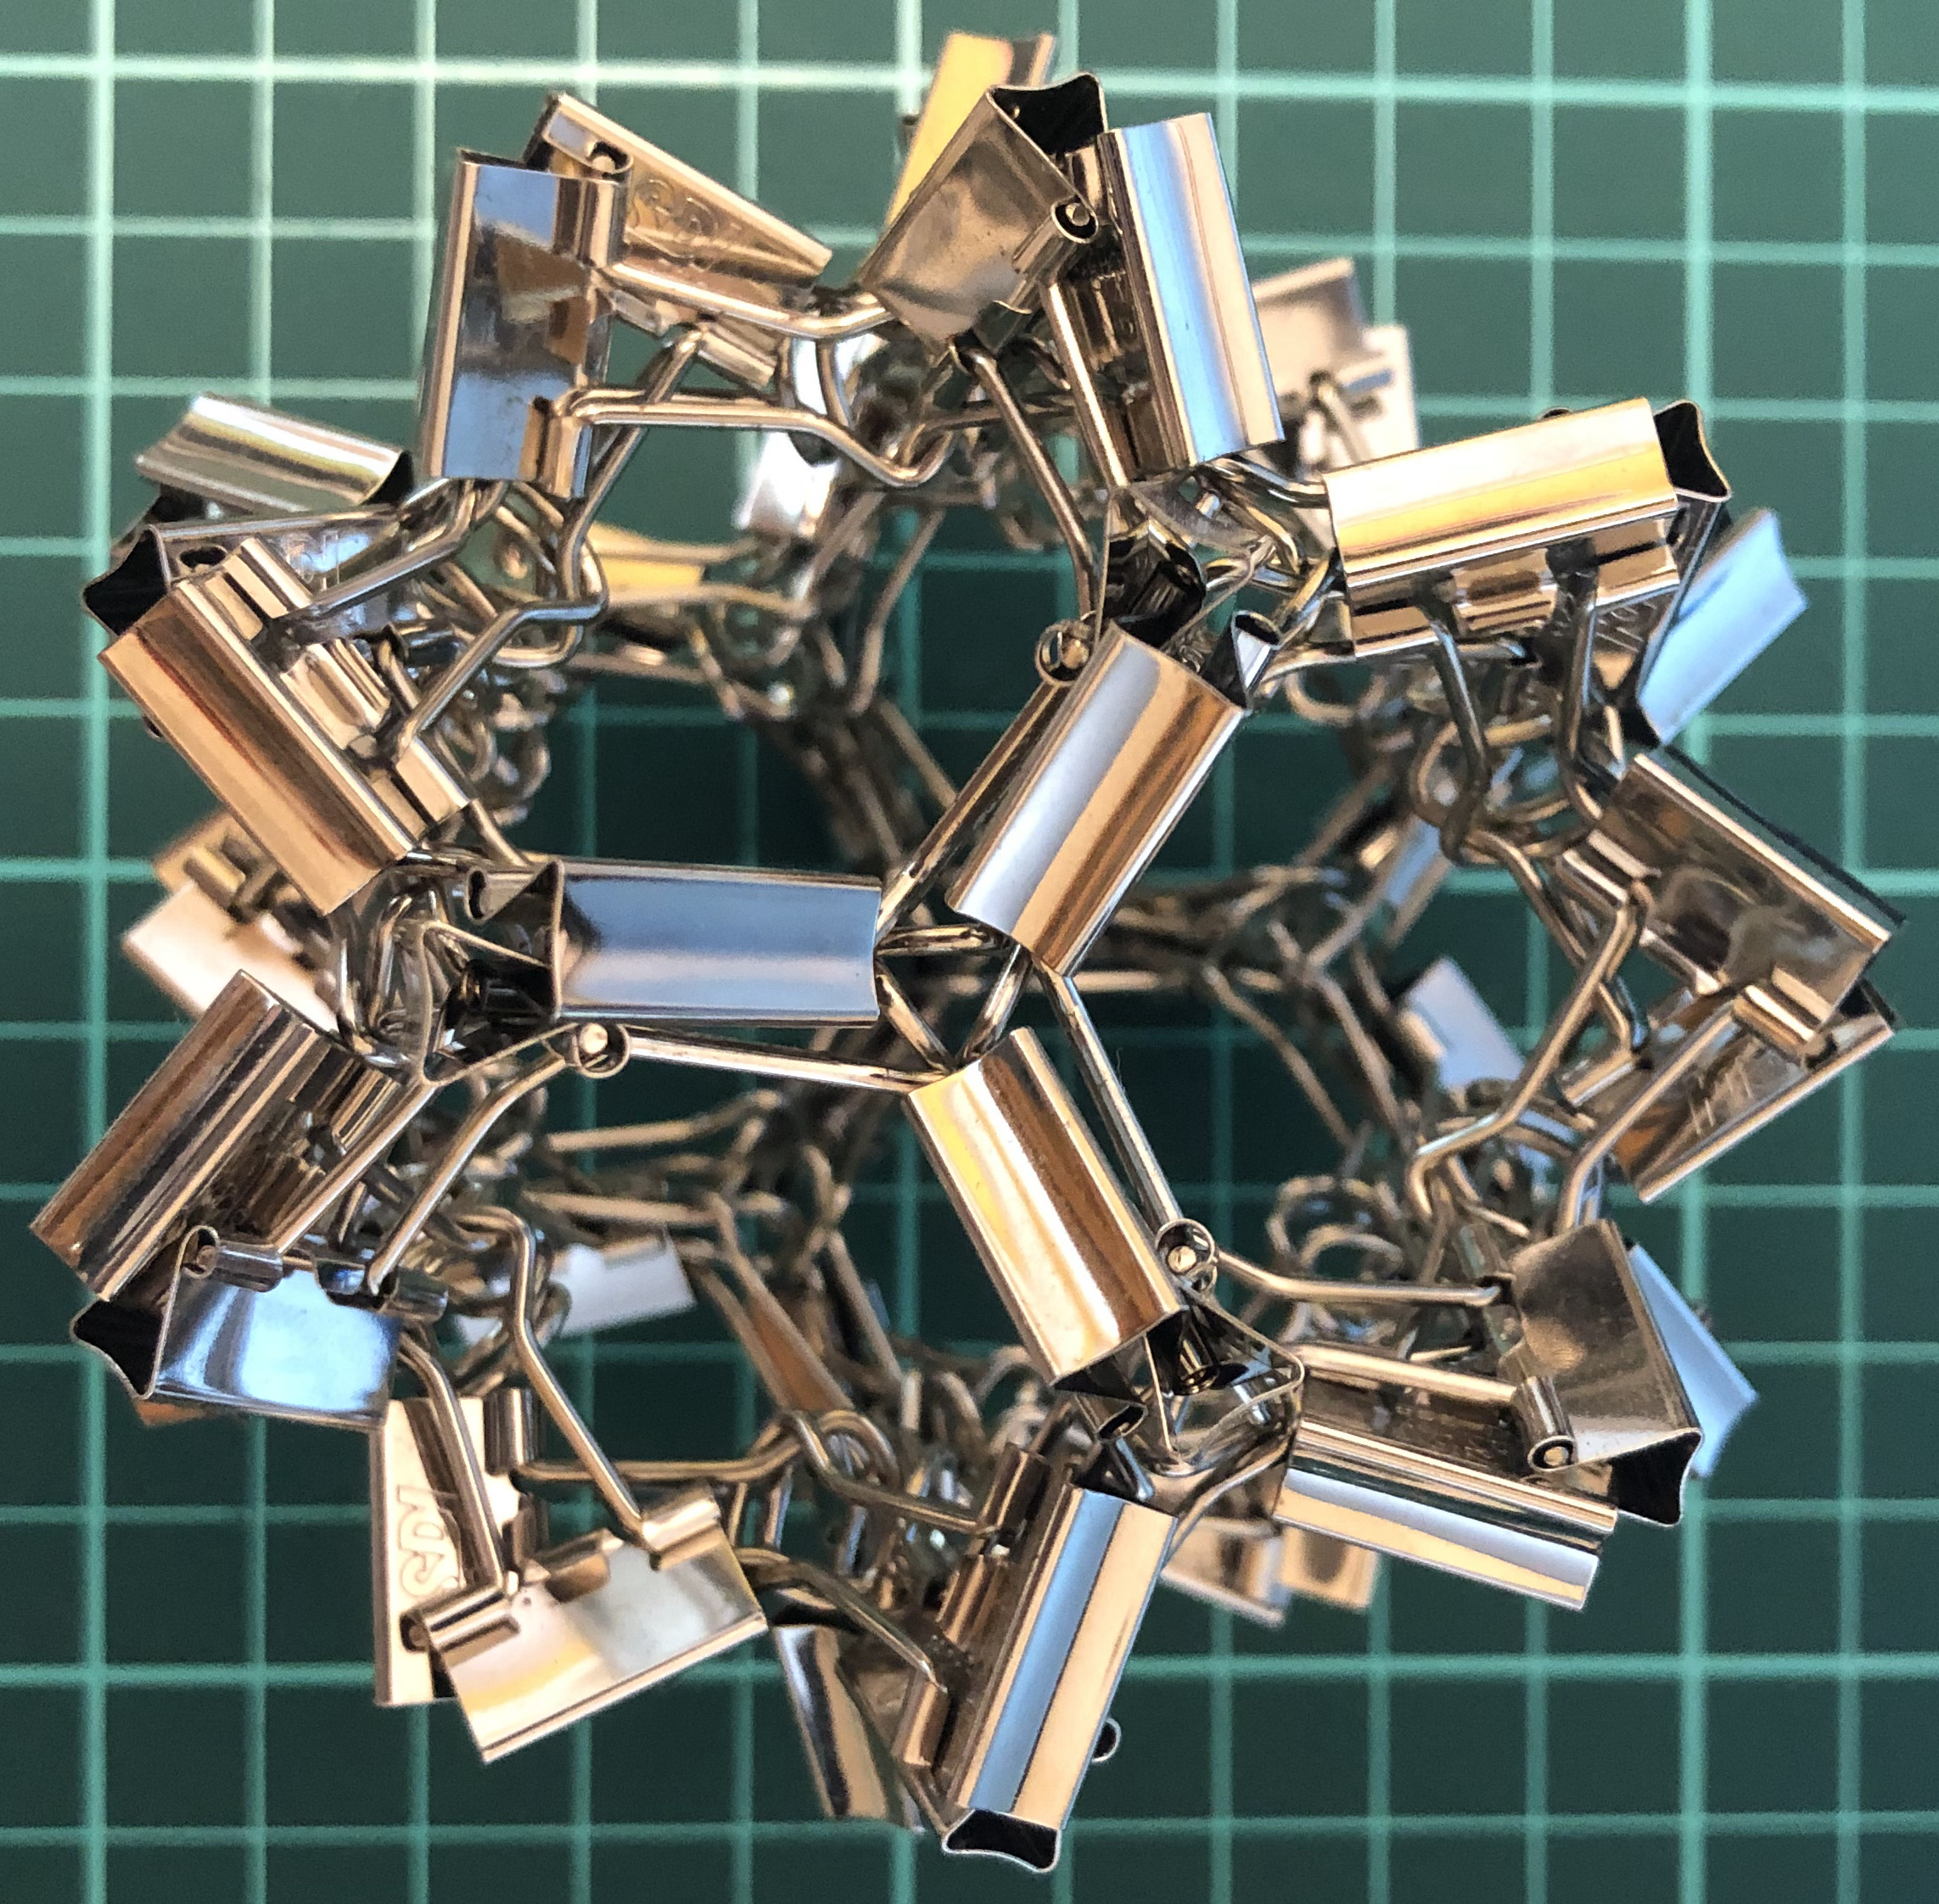 60 clips forming 30 L-edges forming dodecahedron